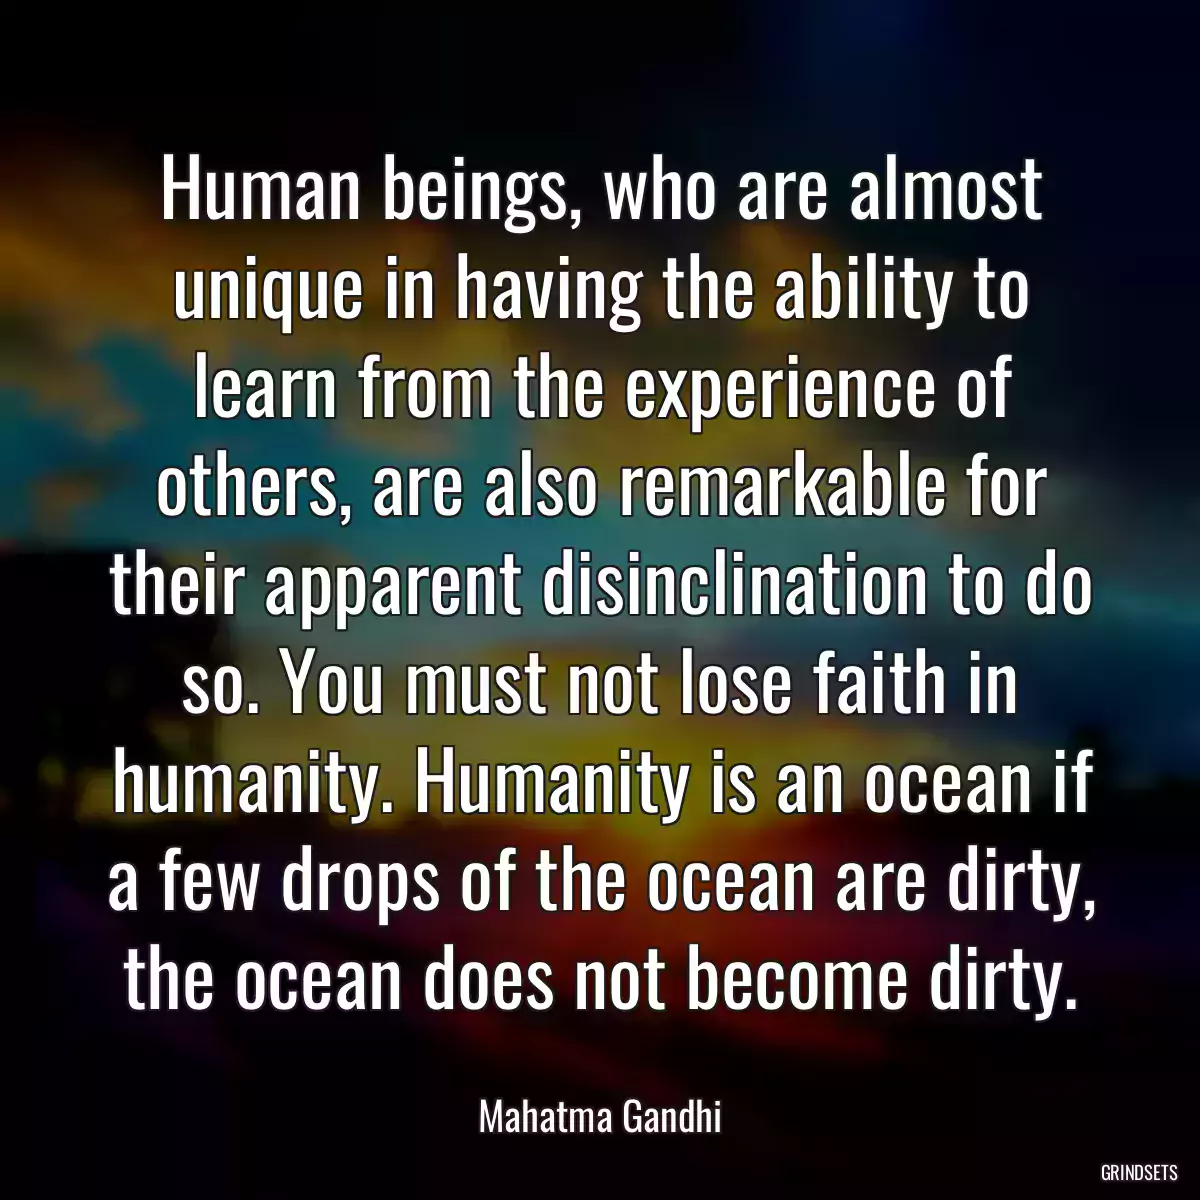 Human beings, who are almost unique in having the ability to learn from the experience of others, are also remarkable for their apparent disinclination to do so. You must not lose faith in humanity. Humanity is an ocean if a few drops of the ocean are dirty, the ocean does not become dirty.